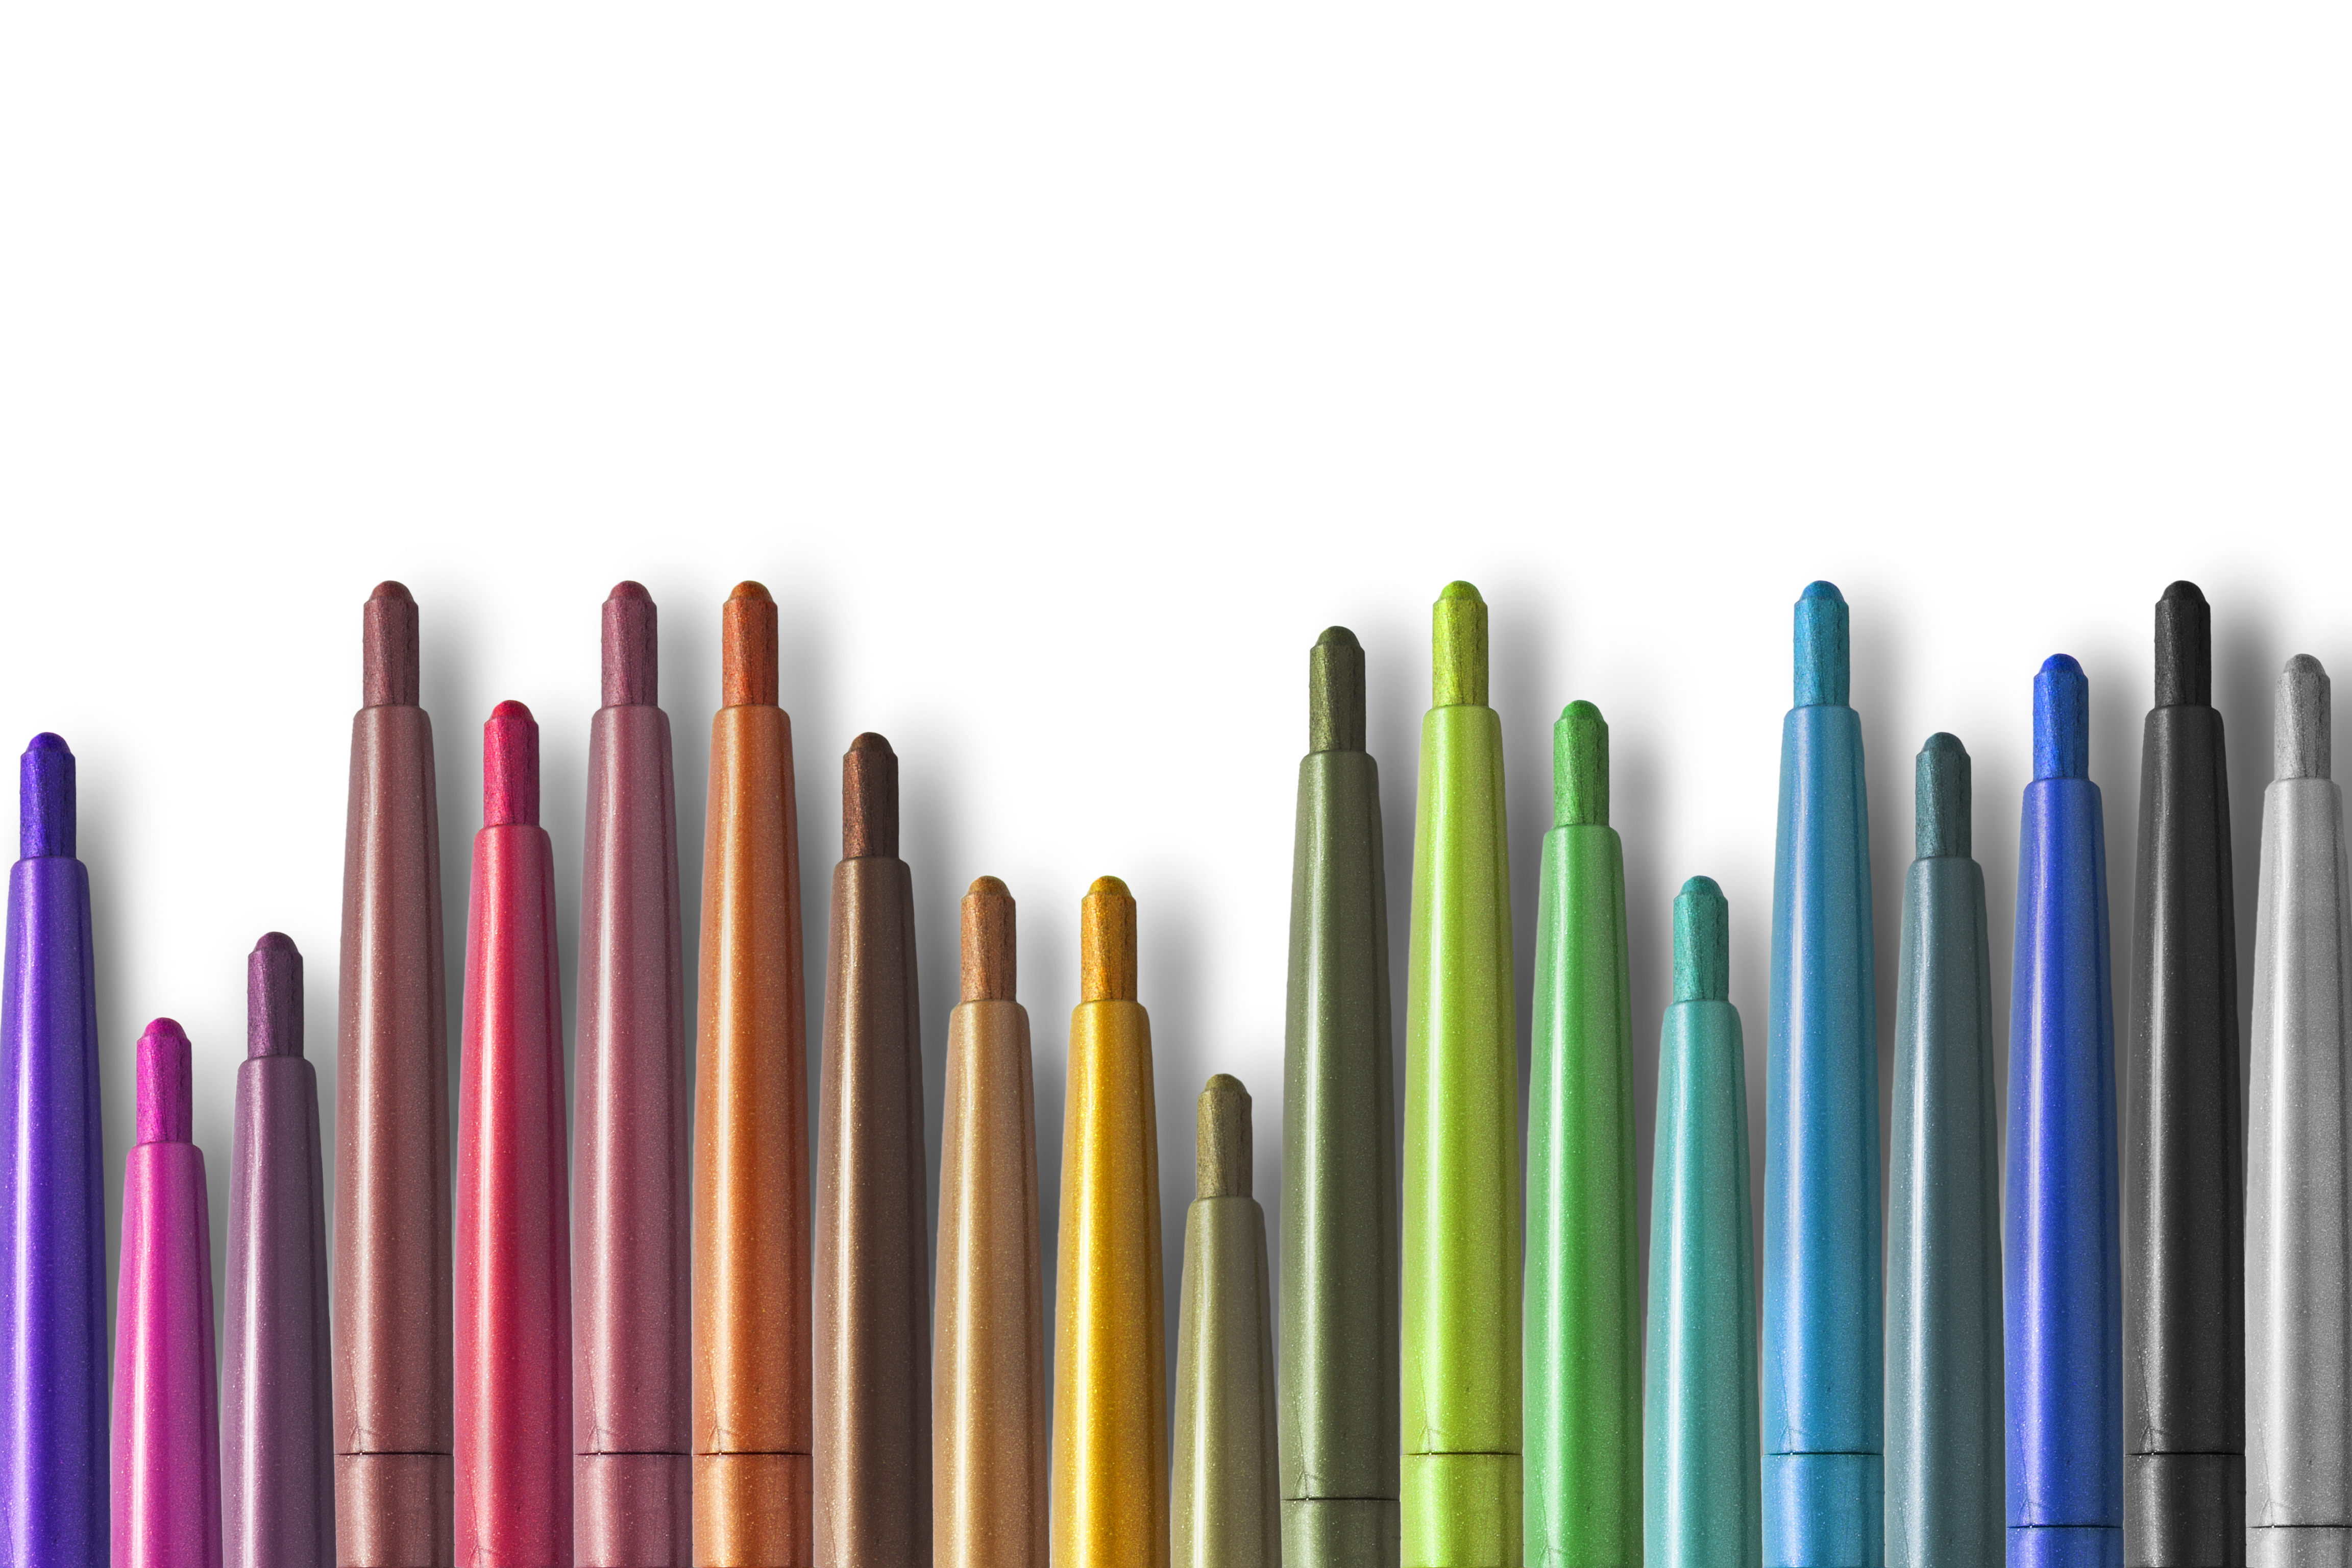 A rainbow of eyeliners. | Source: Getty Images